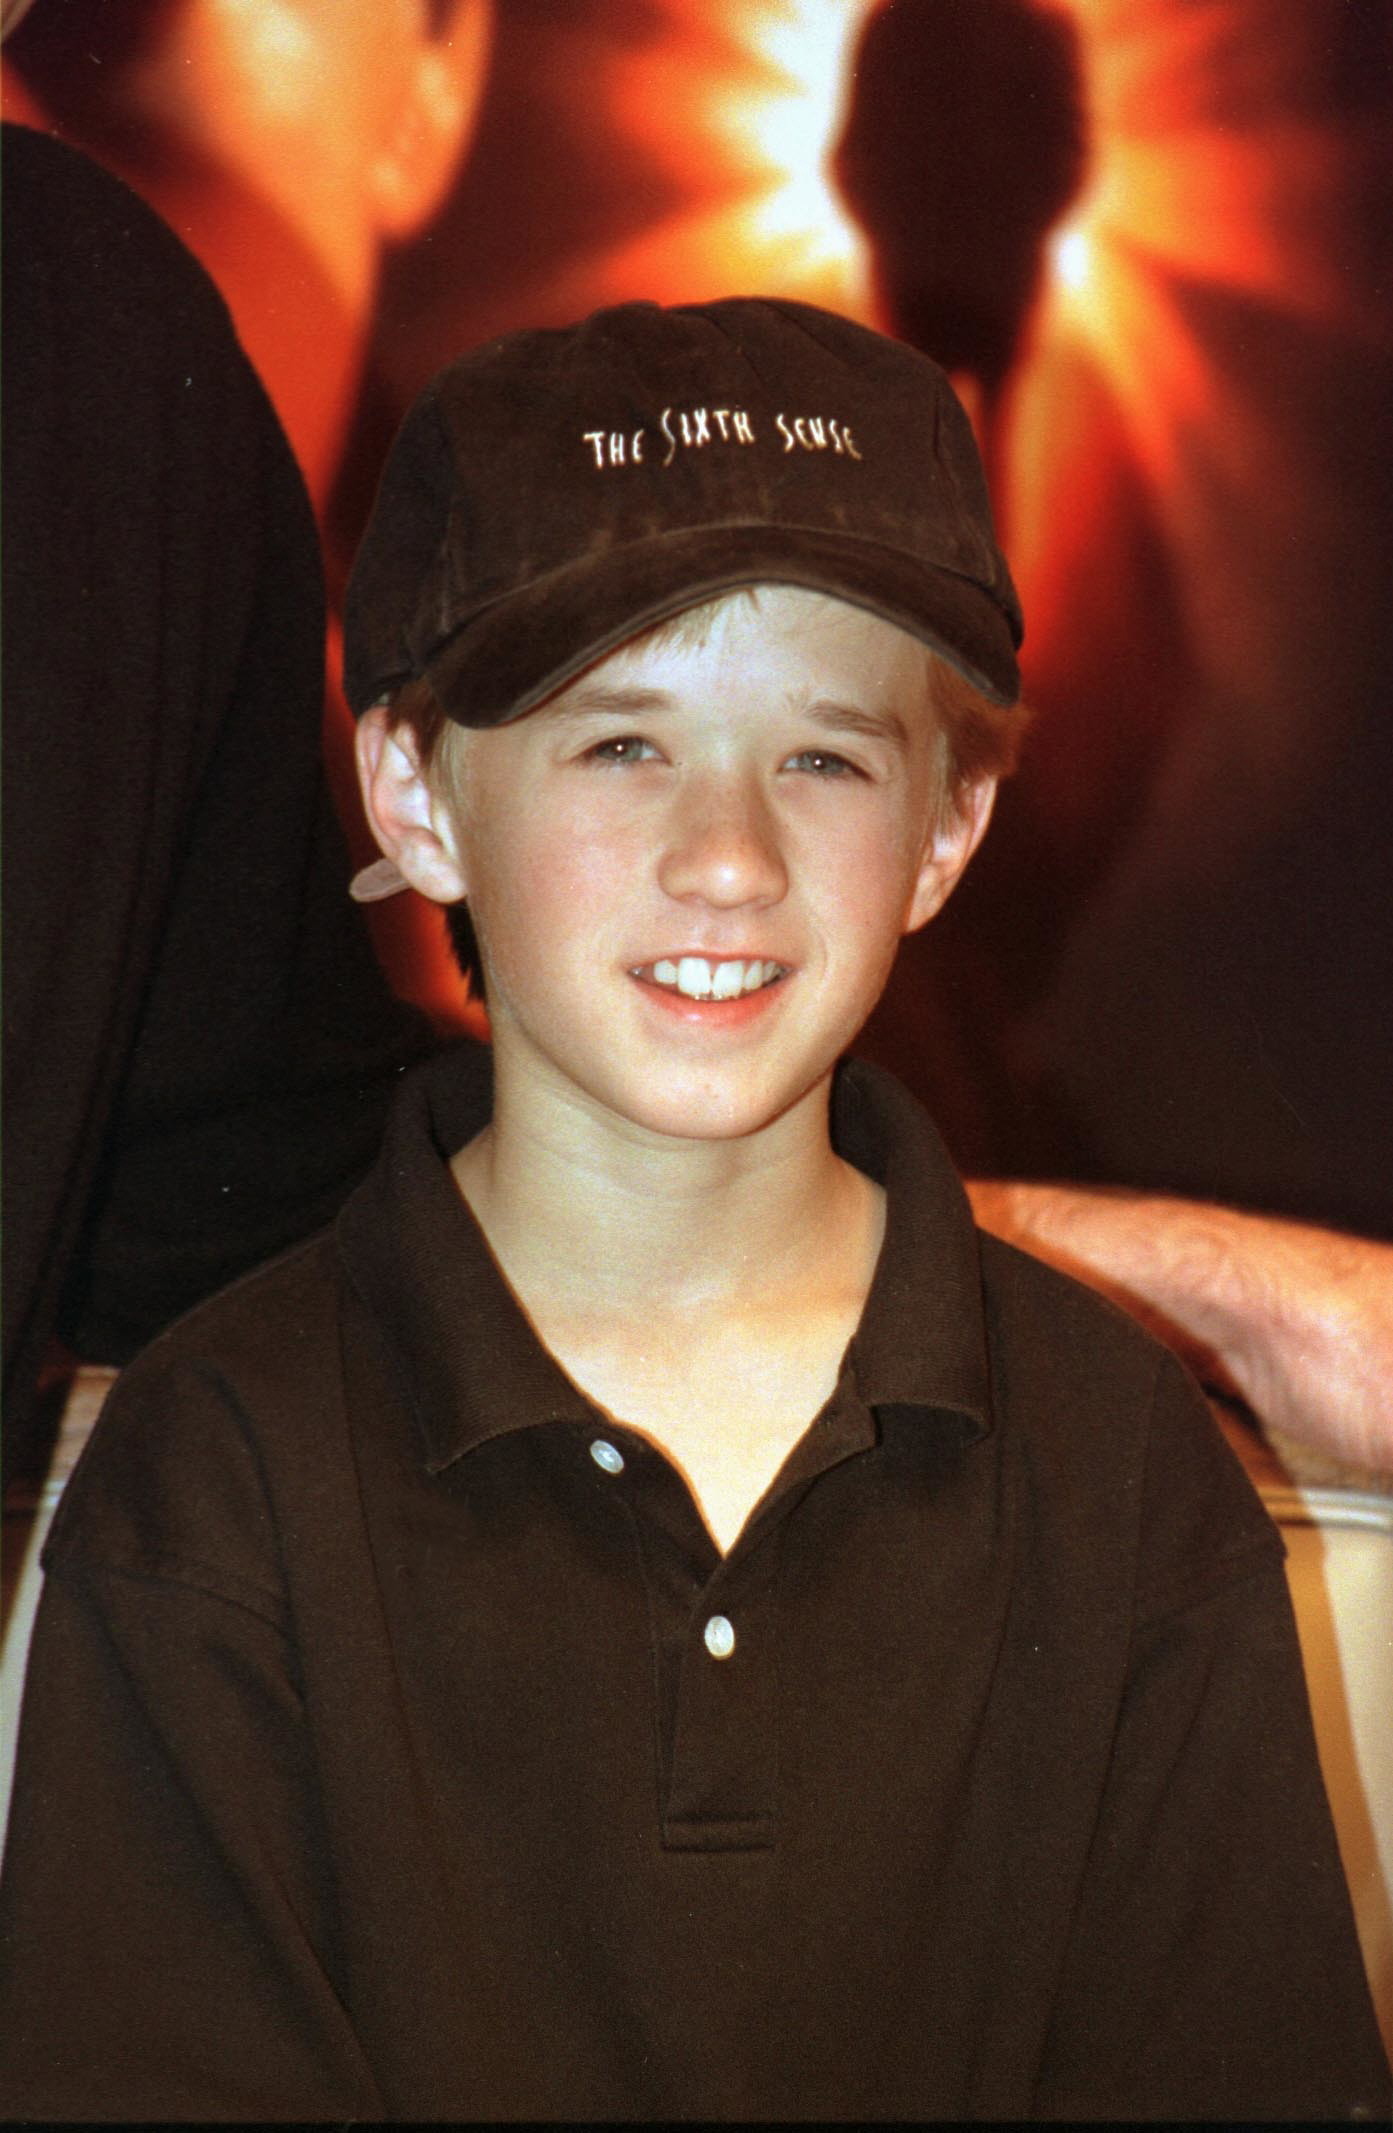 Haley Osment at the preview of the film "The Sixth Sense," on December 8, 1999 | Source: Getty Images